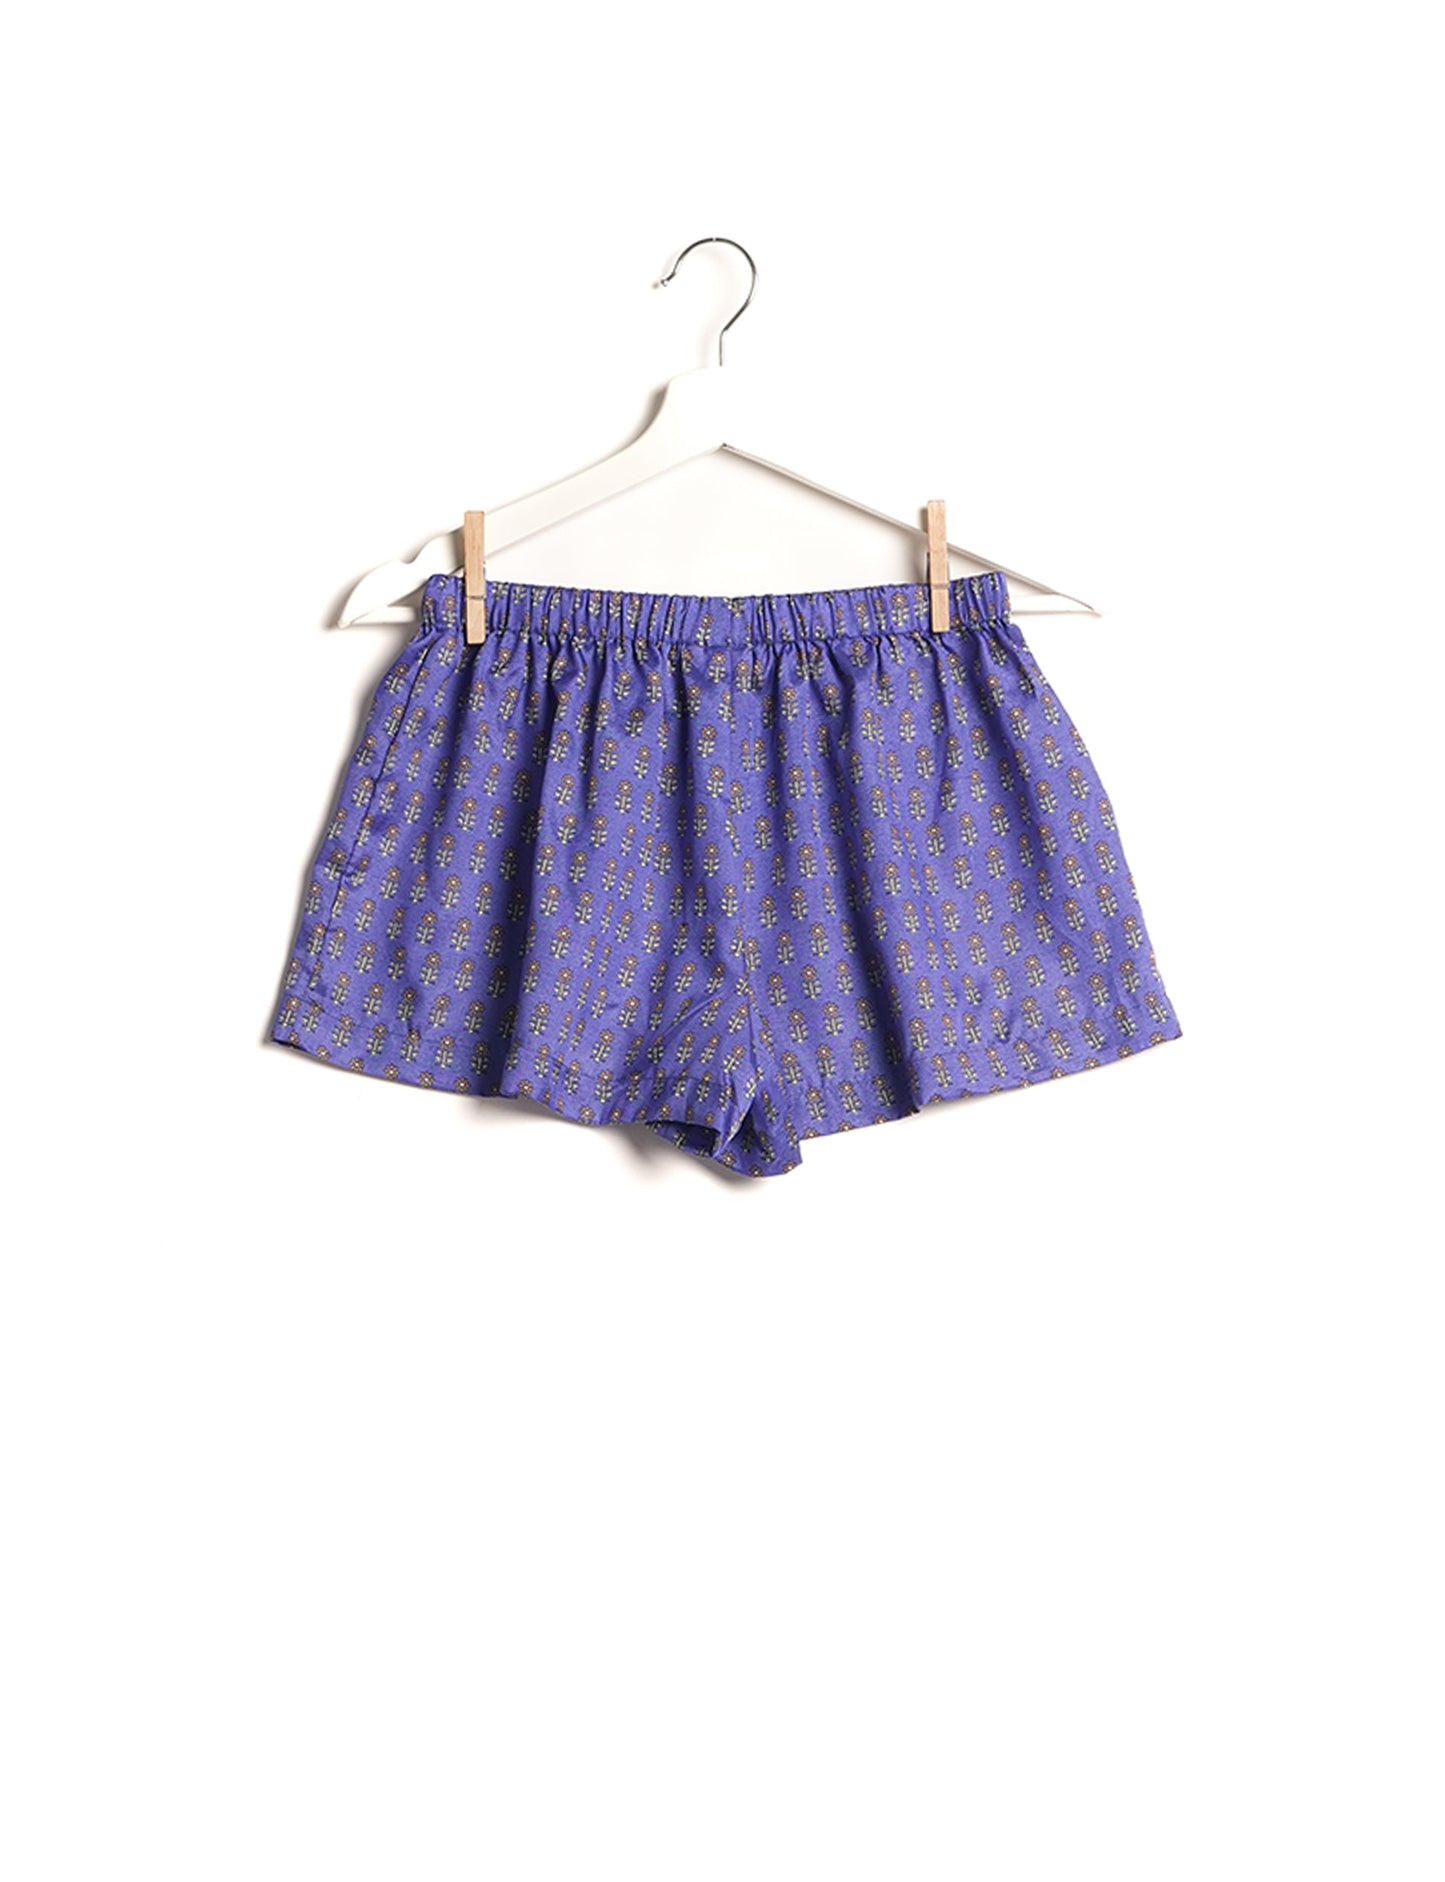 Elevate your wardrobe with our eco-friendly shorts. The all-around elastic waist and drawstring tie provide comfort and style. Crafted with ethical and sustainable practices, these shorts redefine green fashion, making them a perfect addition to your conscious clothing collection.